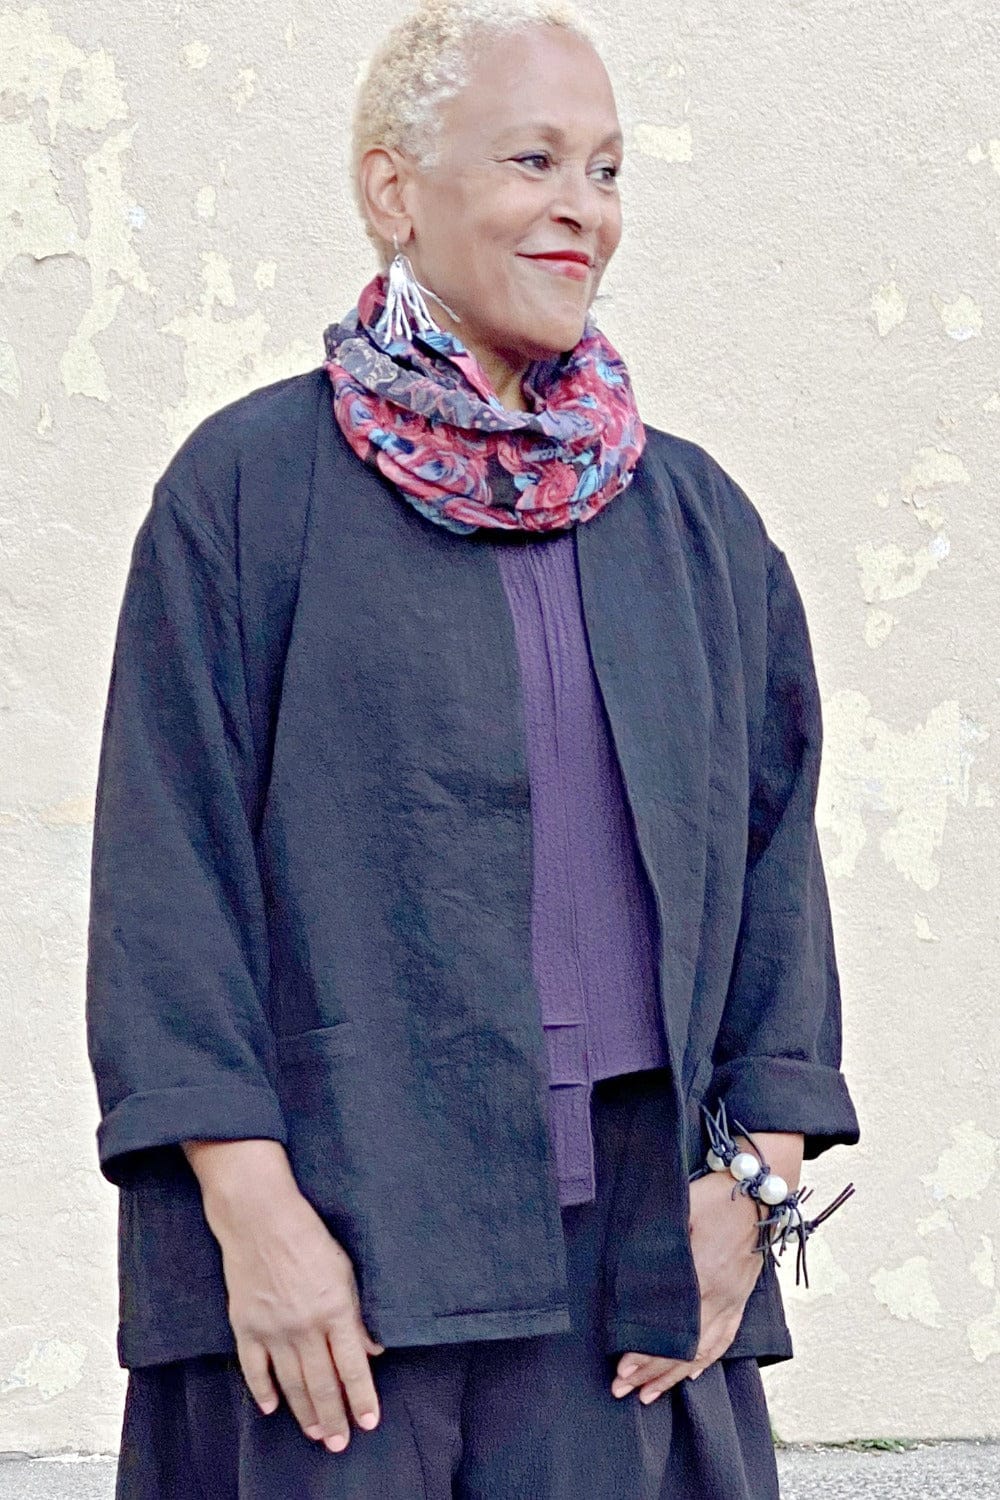 Textured heavy cotton boxy jacket worn over a plum uneven hem top. The older model is also styled with a floral scarf, silver spikey earrings and a black leather spike brackelet.